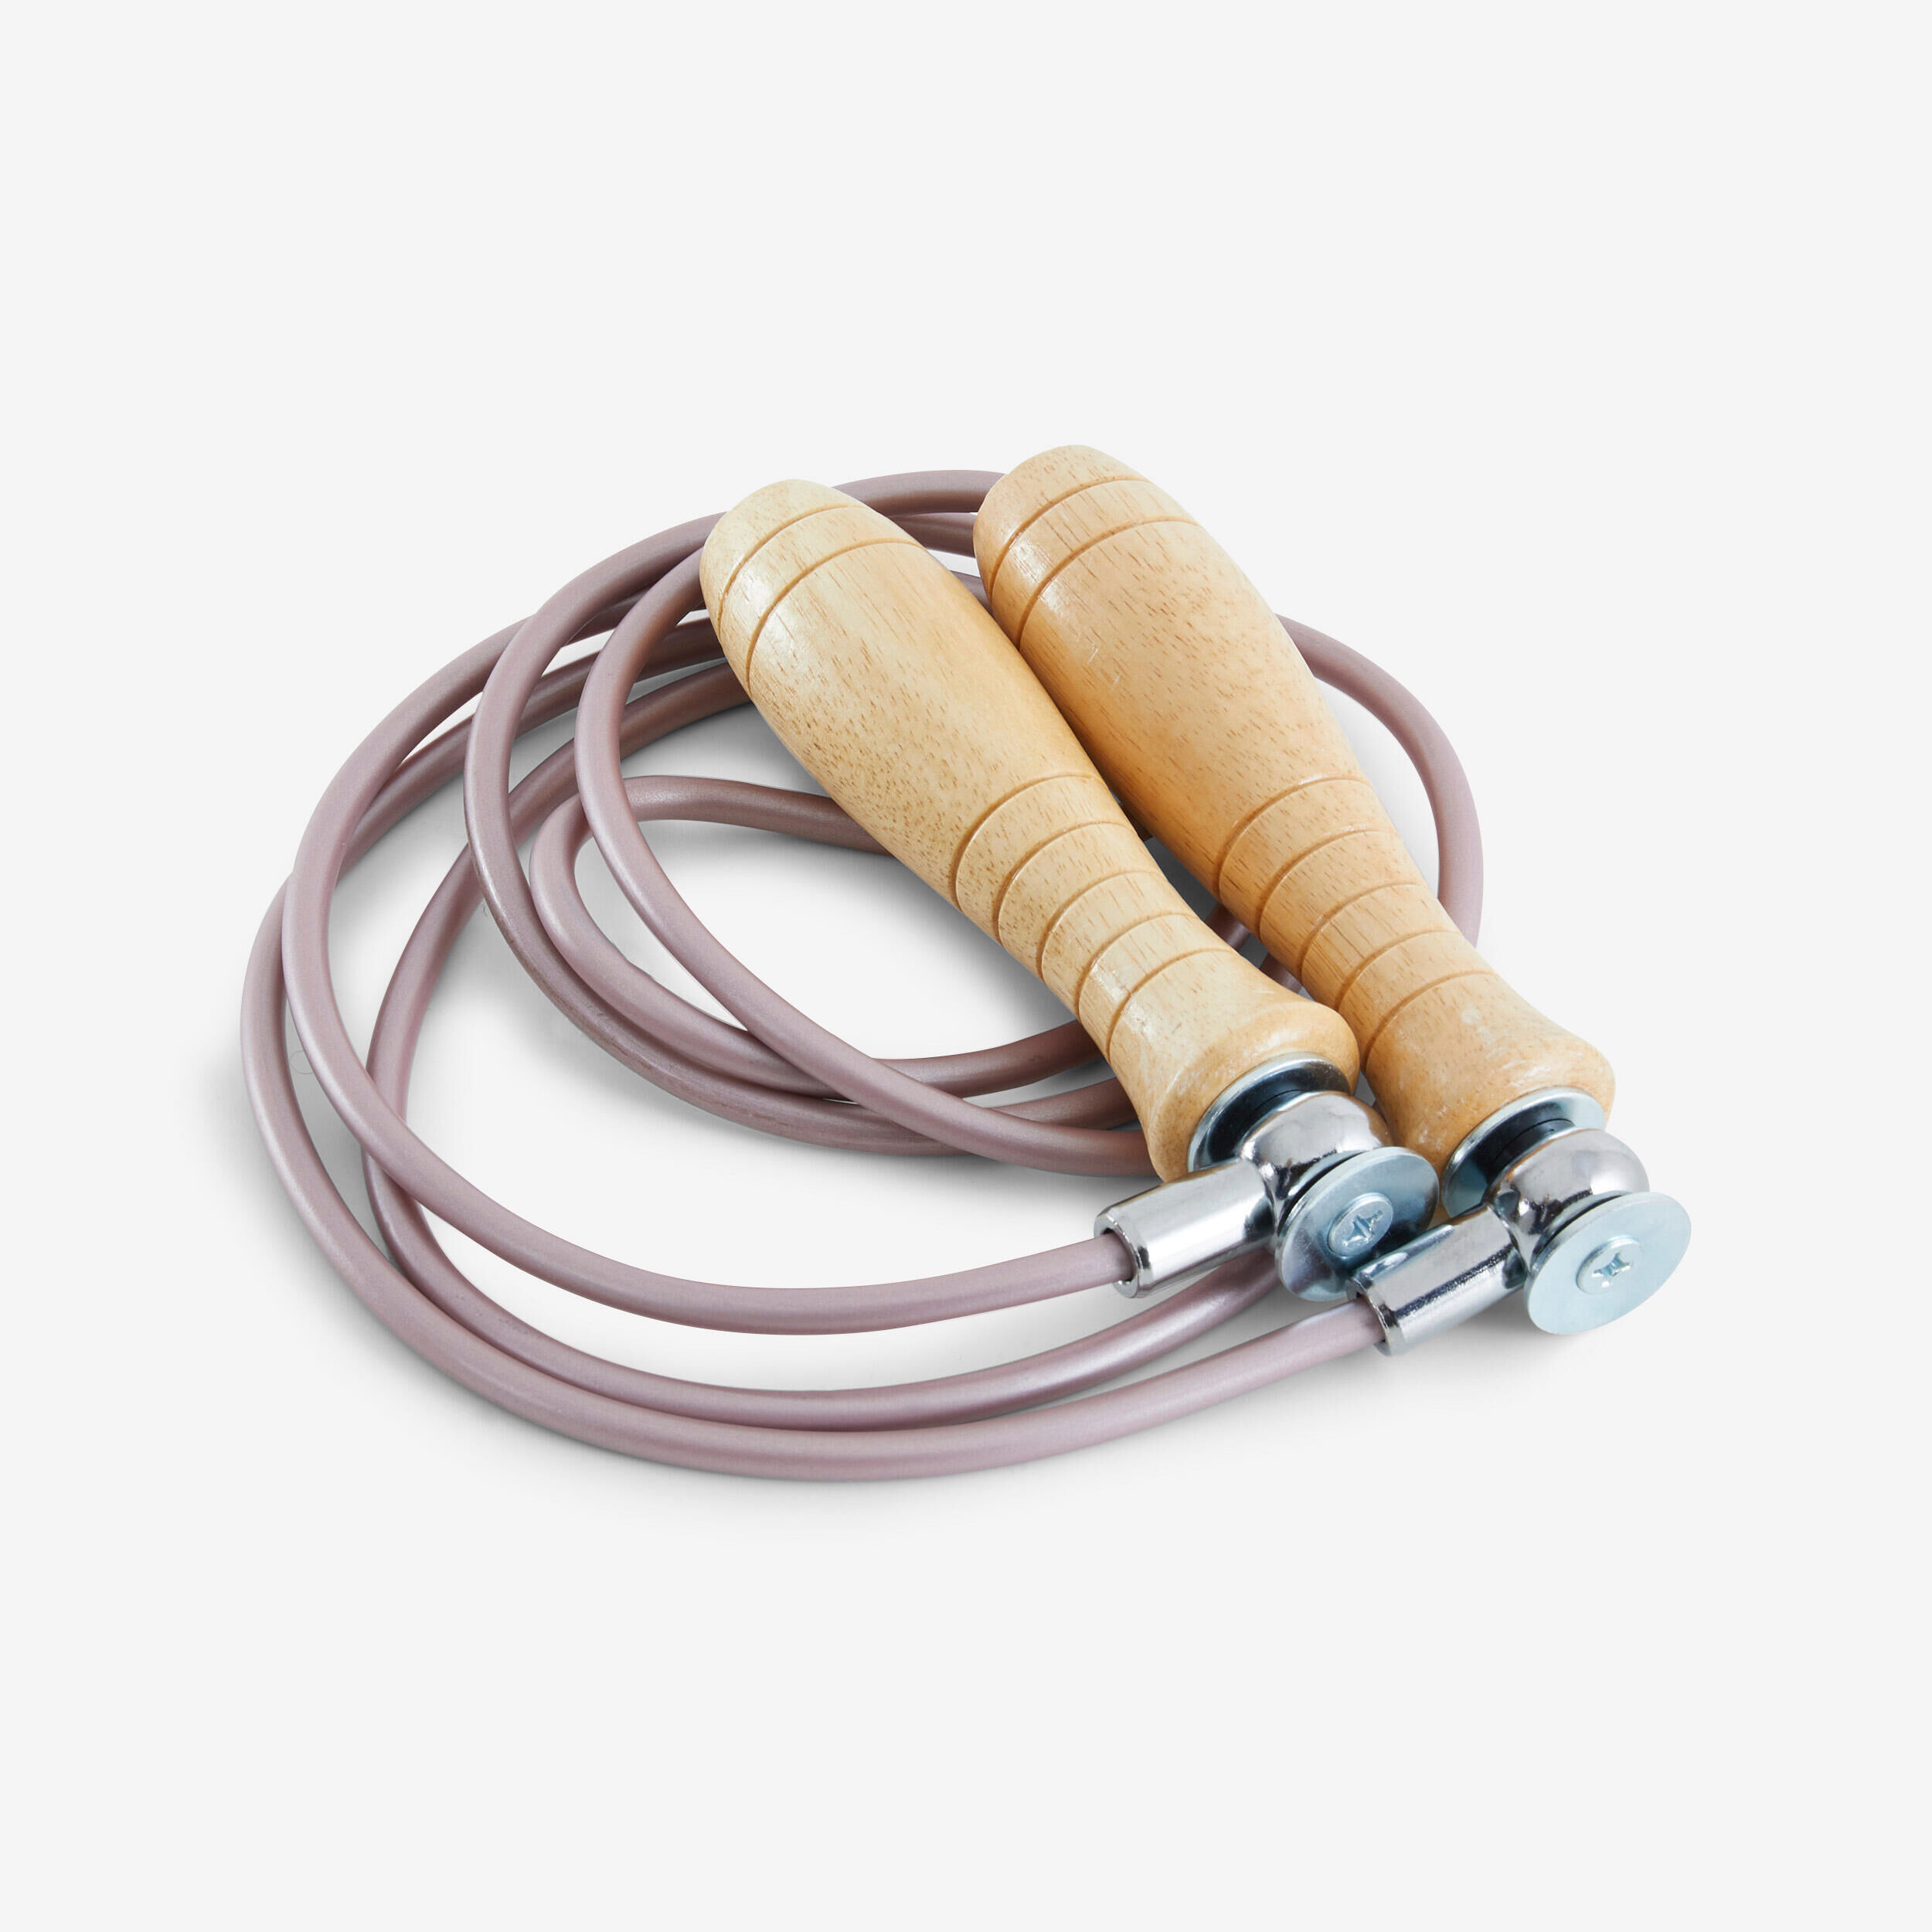 OUTSHOCK Wooden Boxing Skipping Rope with Removable Weights